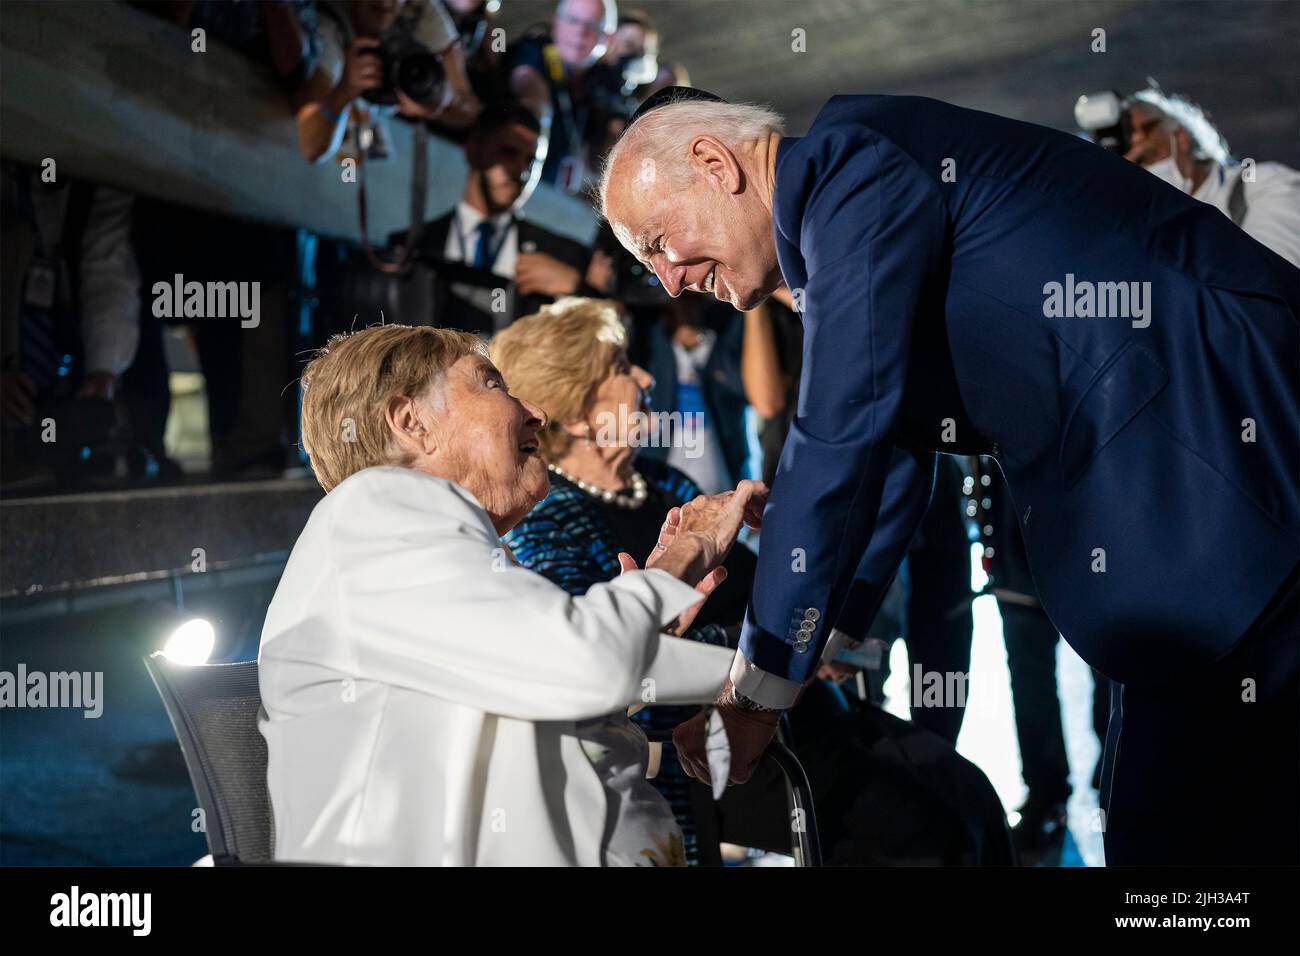 Jerusalem, Israel. 14th July, 2022. U.S President Joe Biden, speaks with Holocaust survivors Rena Quint, left, and Giselle Cycowicz, right, during a visit to the Hall of Remembrance of the Yad Vashem Holocaust Memorial Museum, July 14, 2022 in Jerusalem, Israel. Credit: Adam Schultz/White House Photo/Alamy Live News Stock Photo